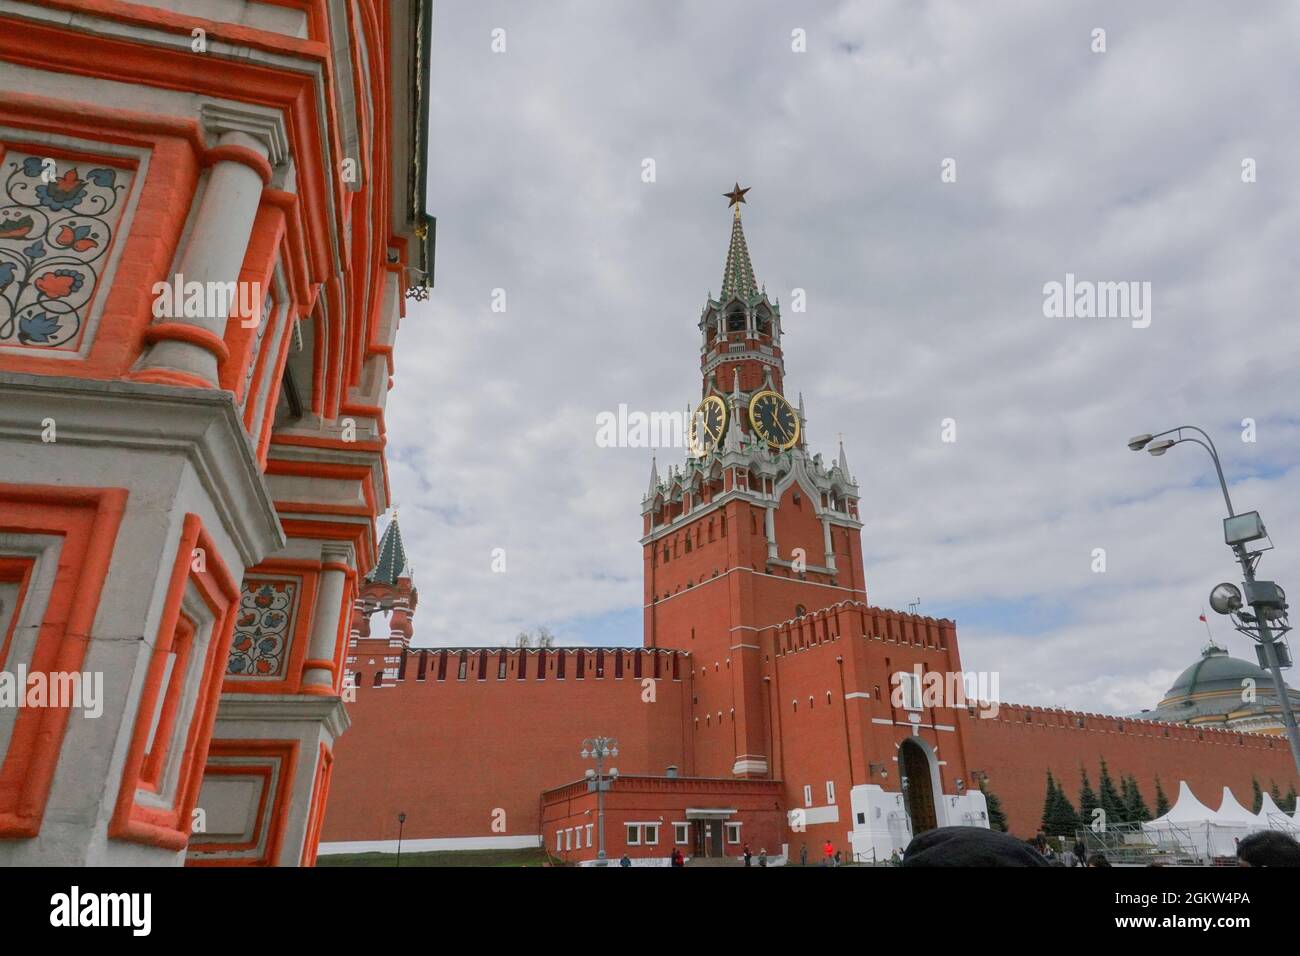 The Spasskaya Tower of the Moscow Kremlin on Red Square, with huge clock  and five stars on top - The five-pointed red star has often served as a  symbo Stock Photo -